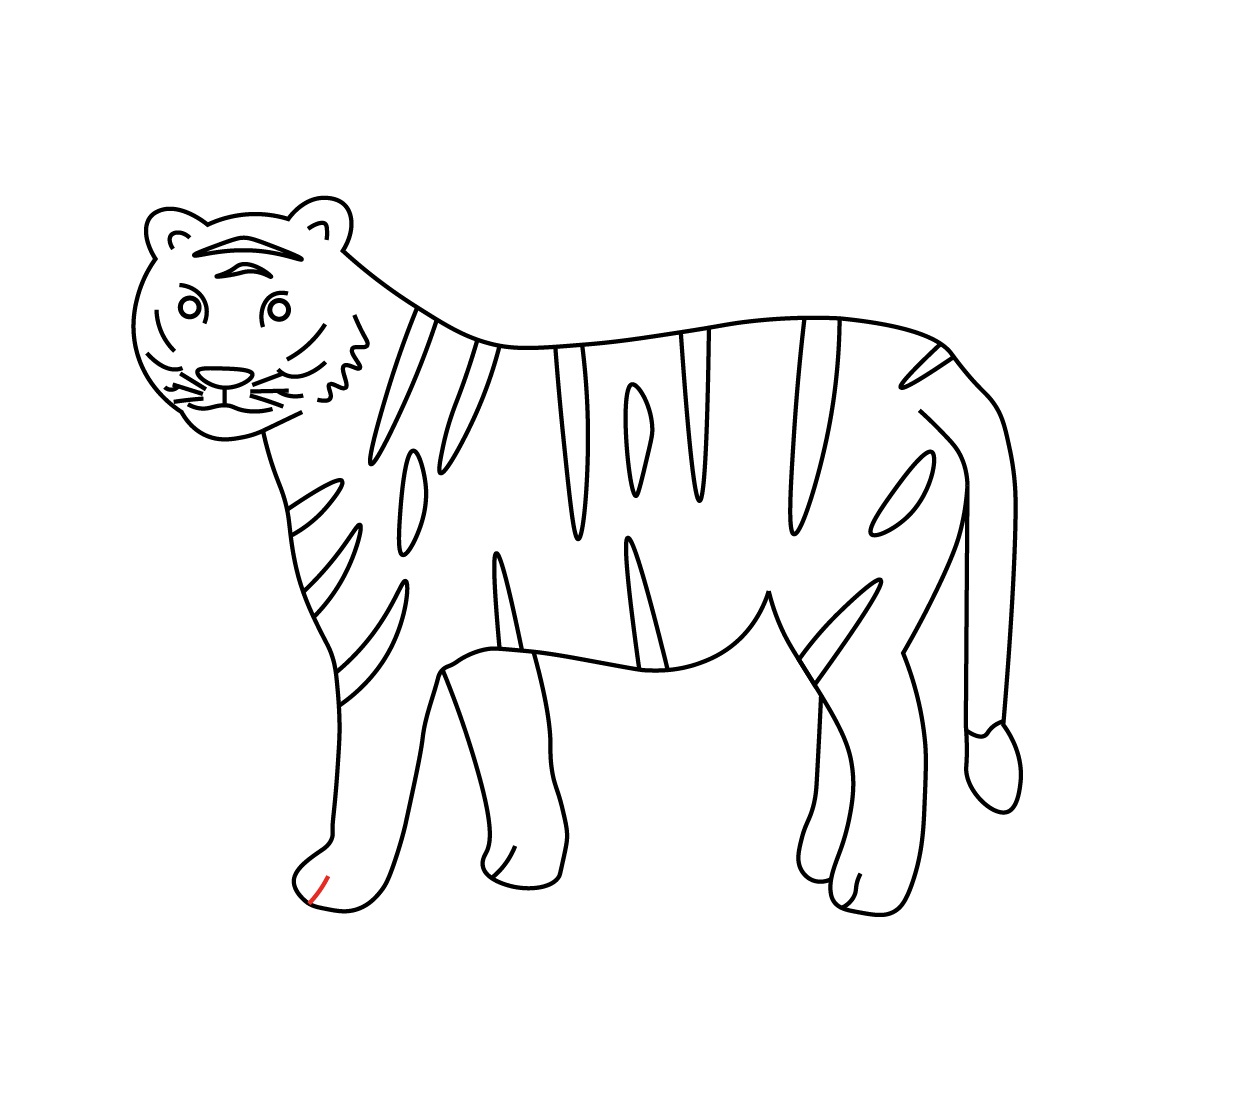 How to Draw a Tiger | Envato Tuts+